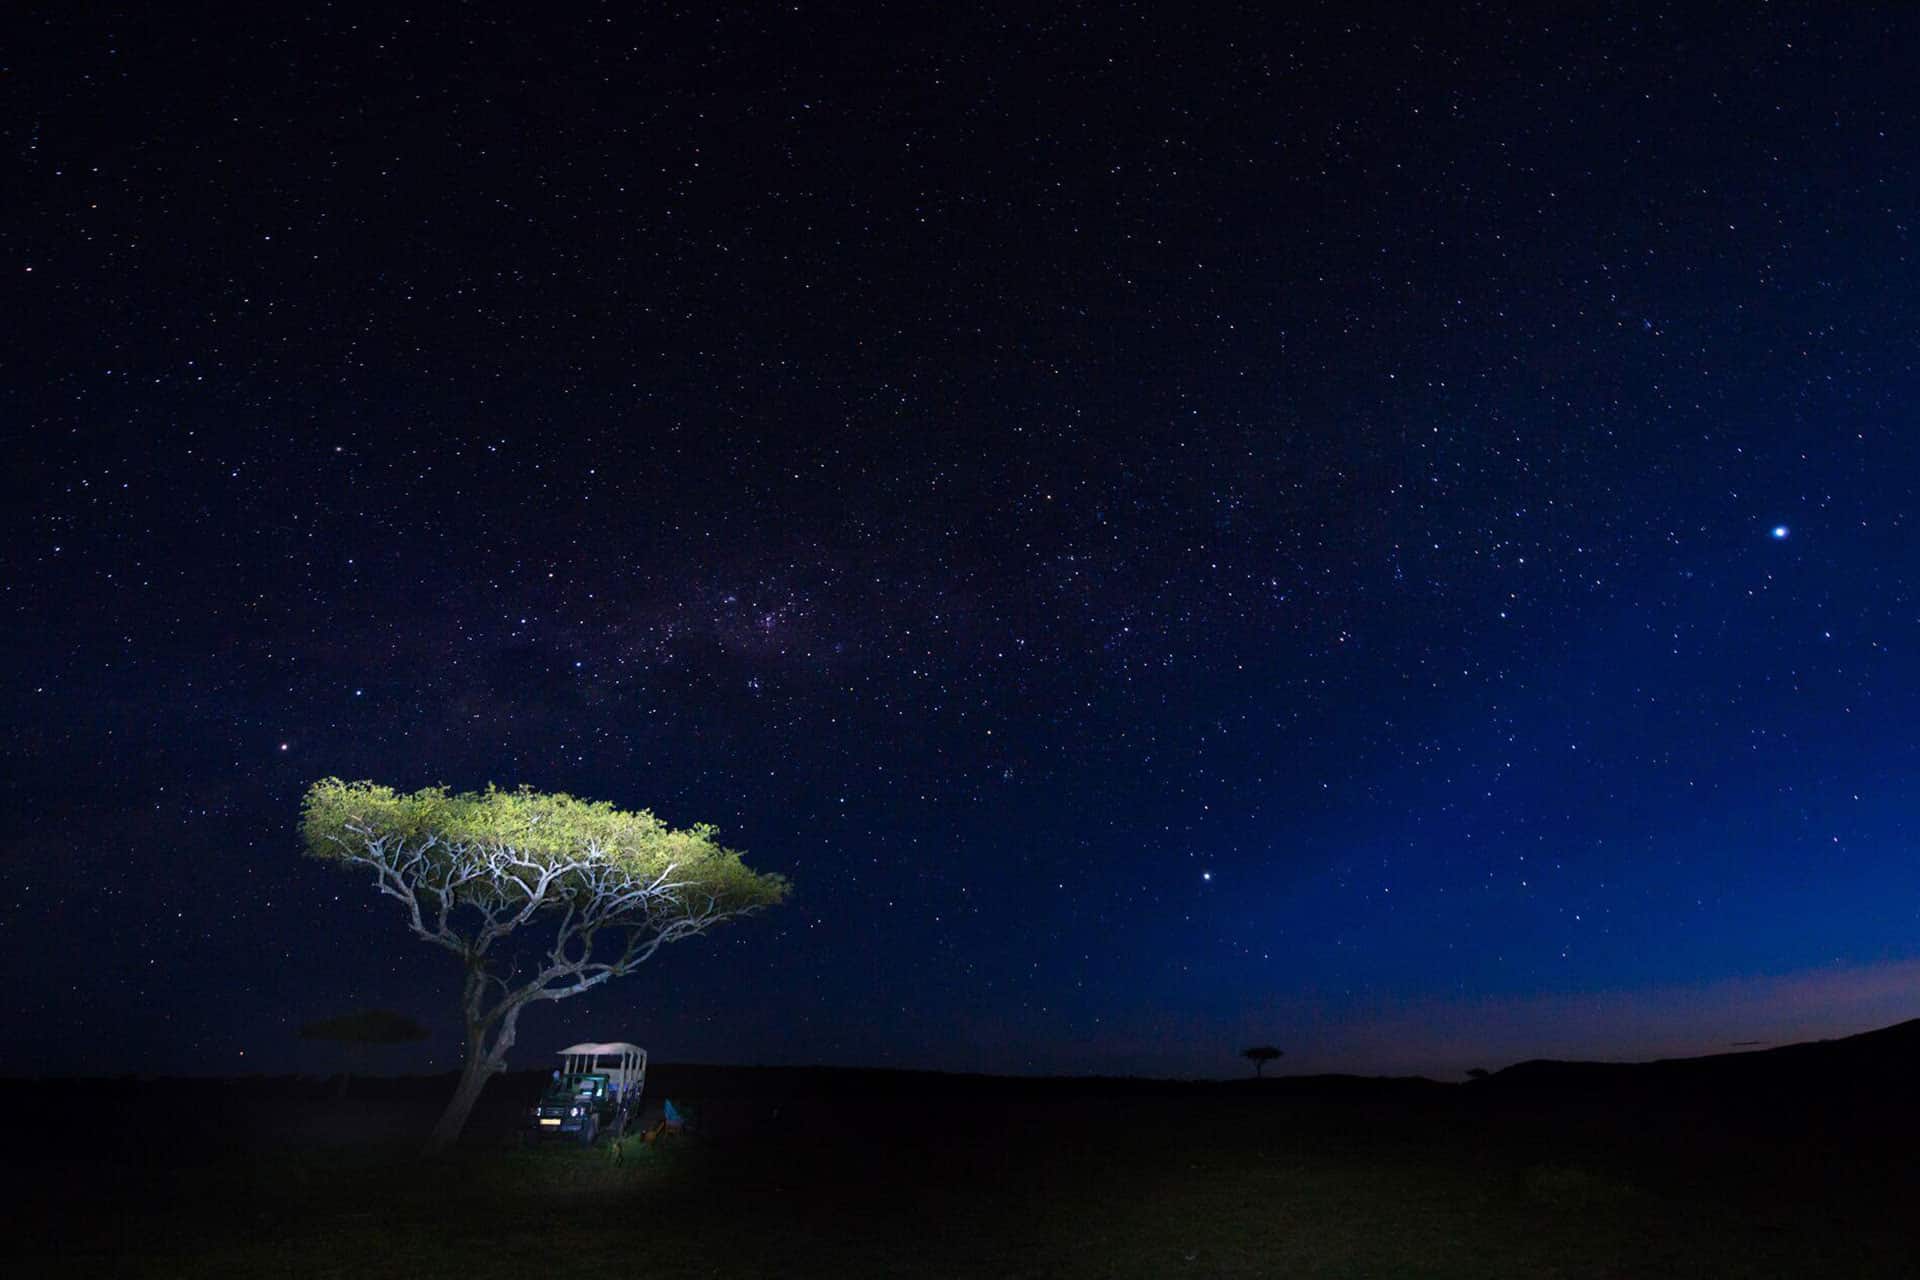 A safari vehicle and a tree lit up by the stars at night in the Loliondo Concession at Taasa Lodge.